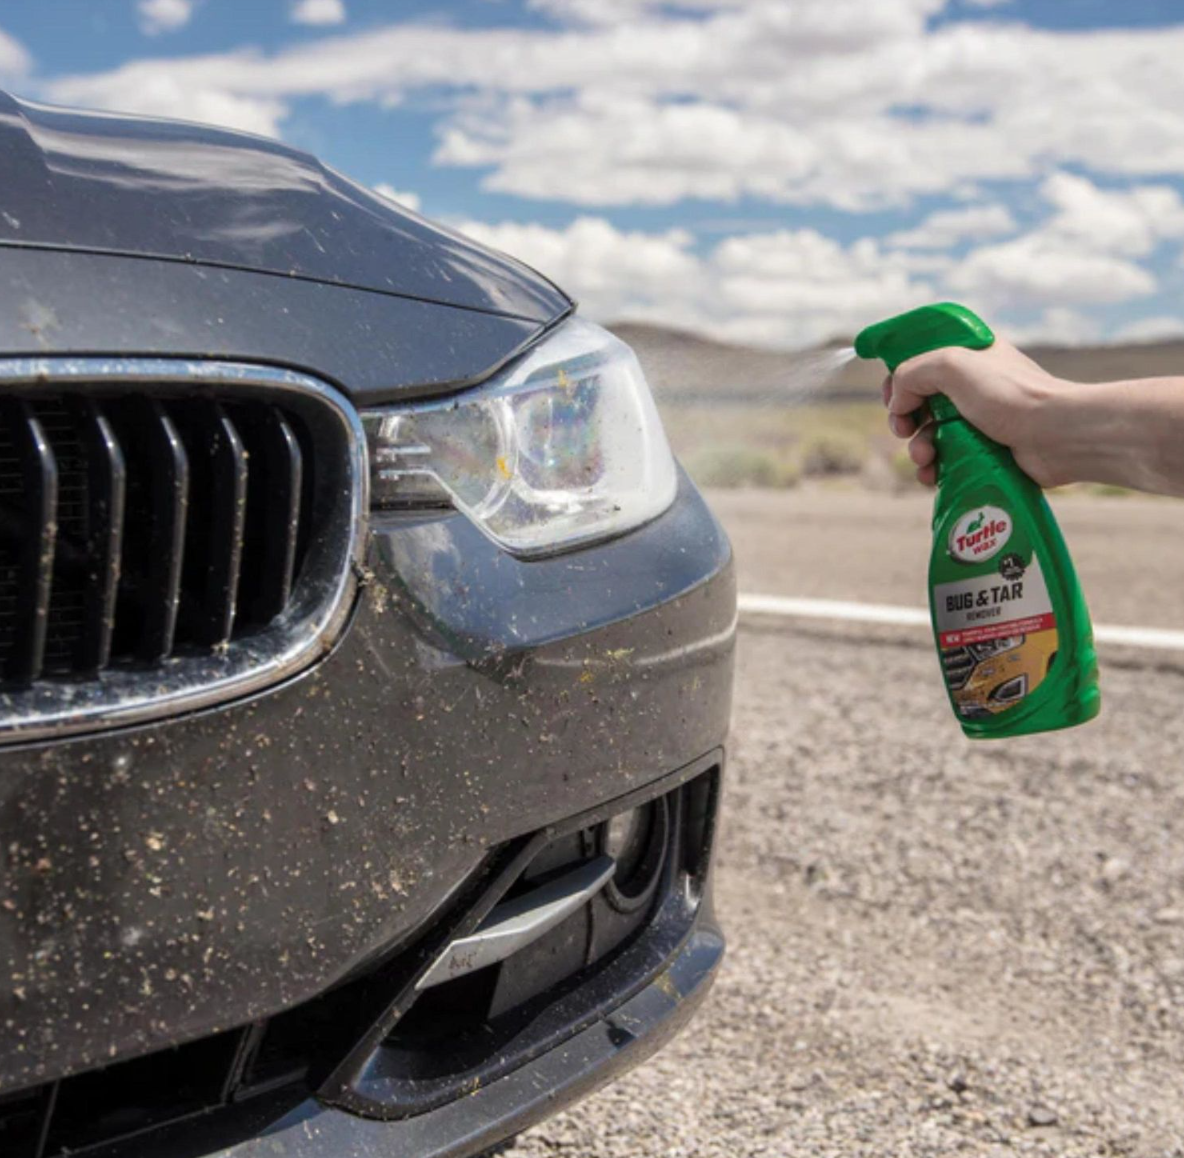 5 car care tips for removing stickers from your vehicle